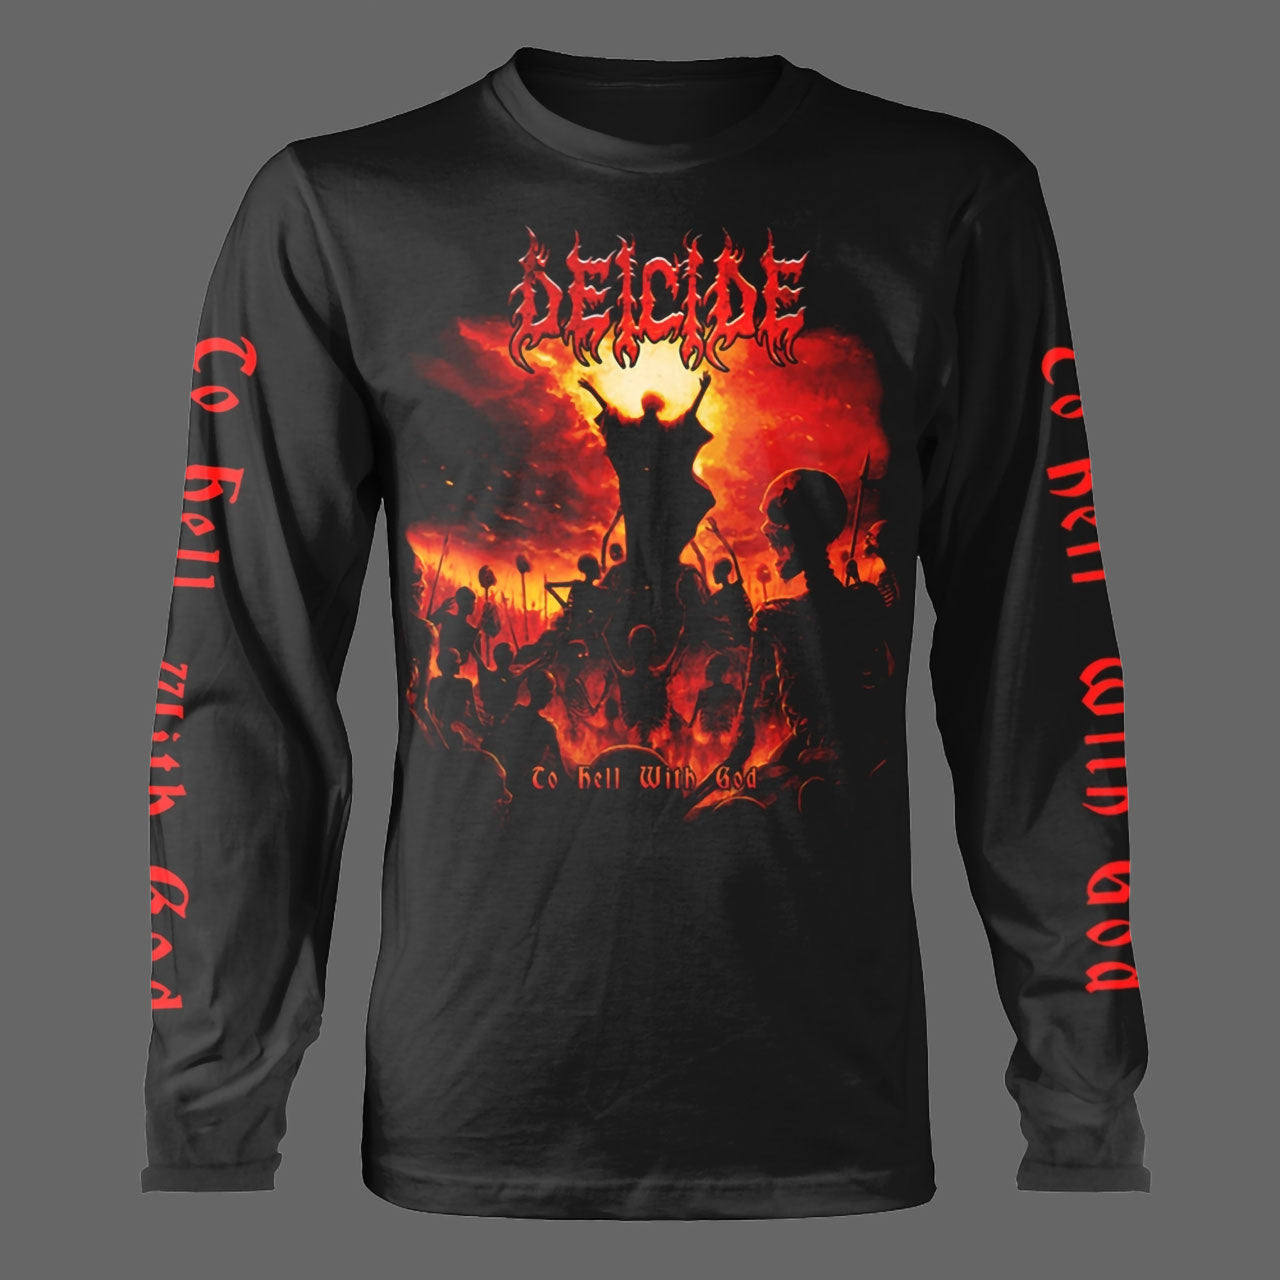 Deicide - To Hell with God (Long Sleeve T-Shirt)